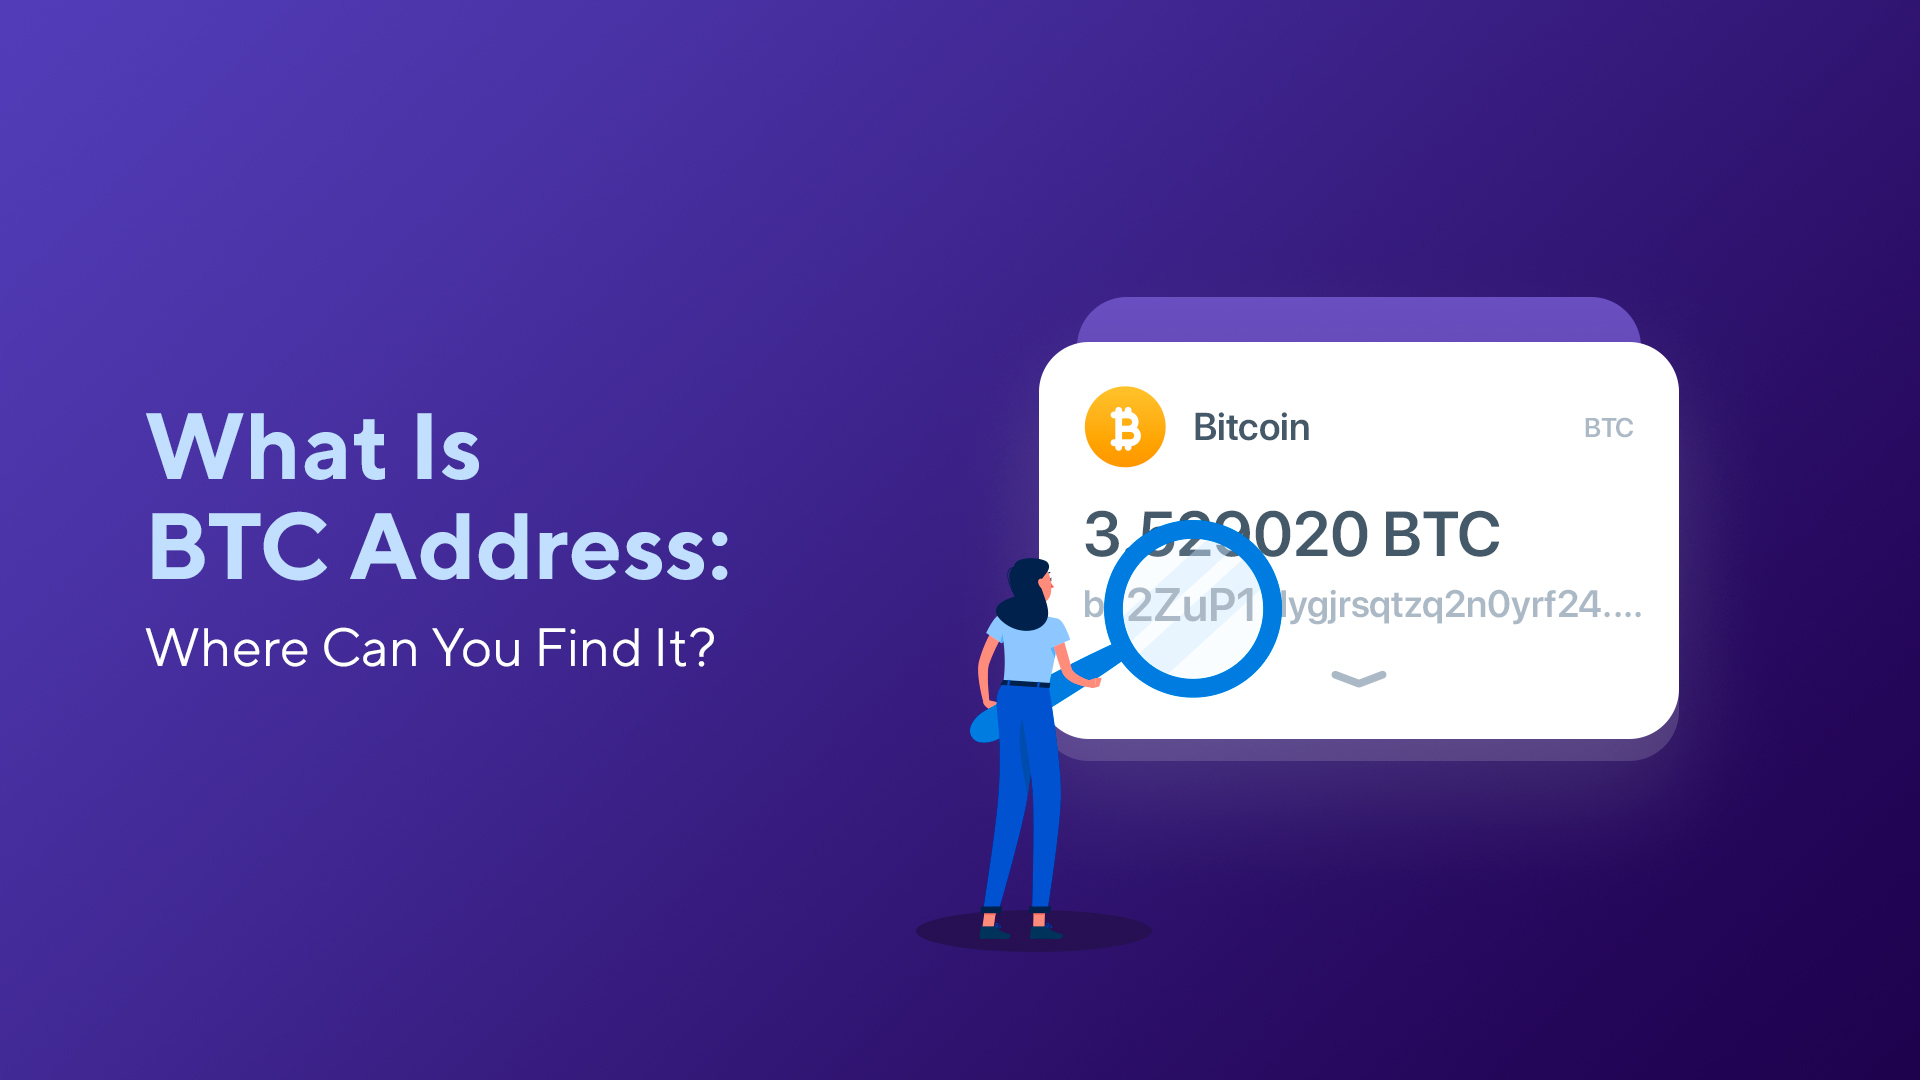 How to Find the Owner of a Bitcoin Address and Wallet?